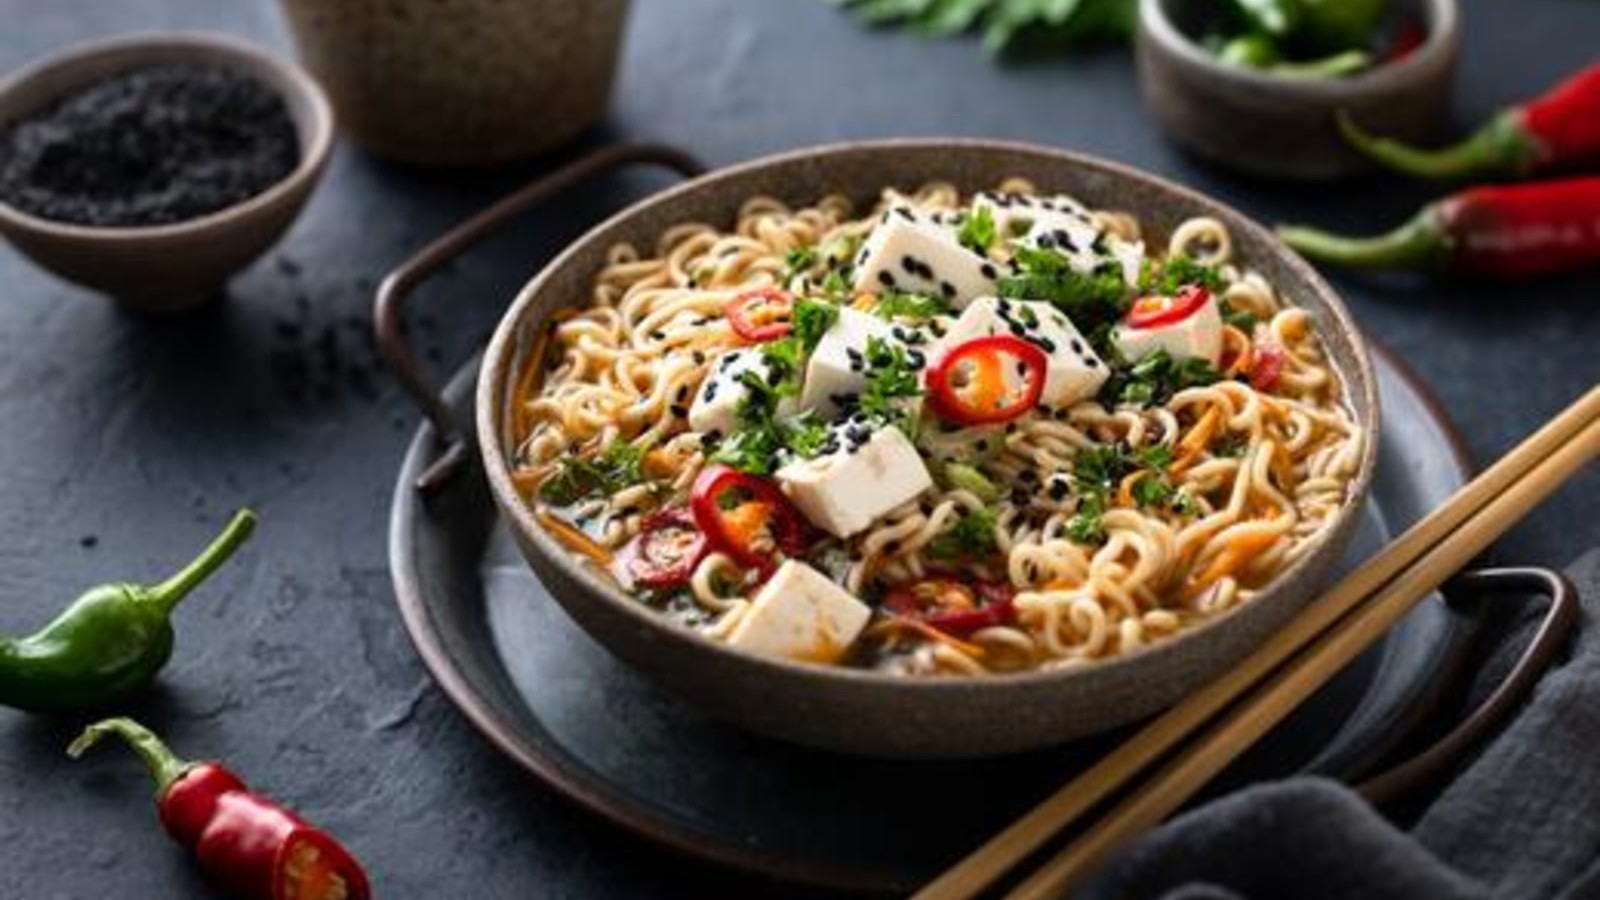 Image of Spicy Ramen Noodles with Tofu